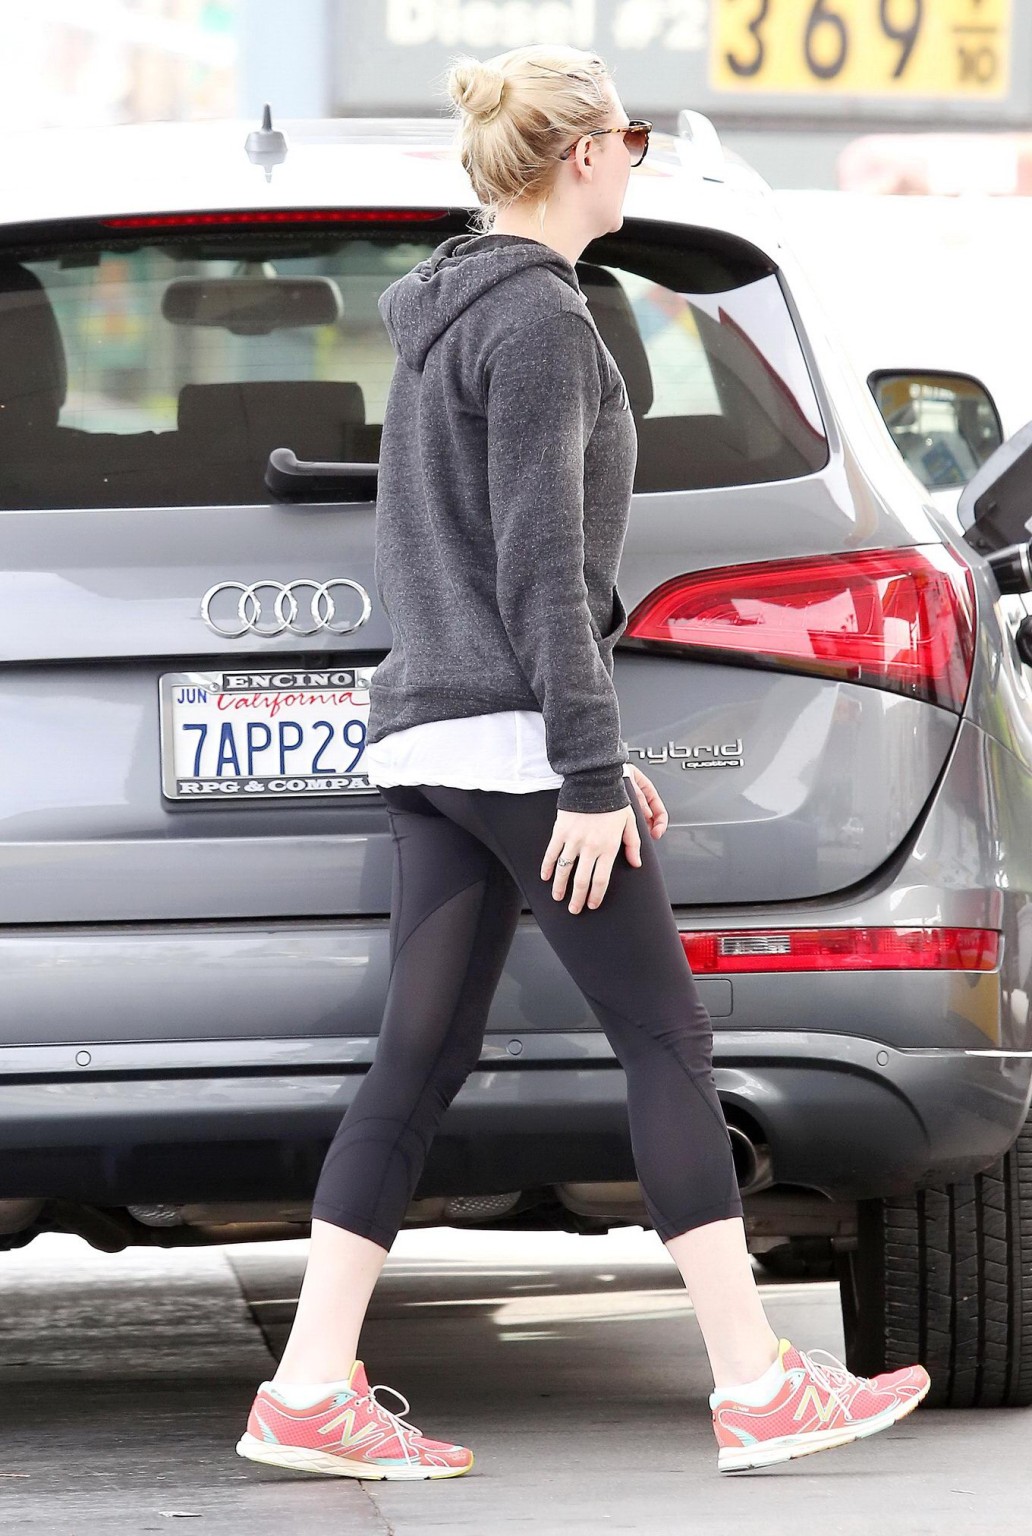 Kirsten Dunst shows off her ass in black tights while pumping gas in LA #75177385